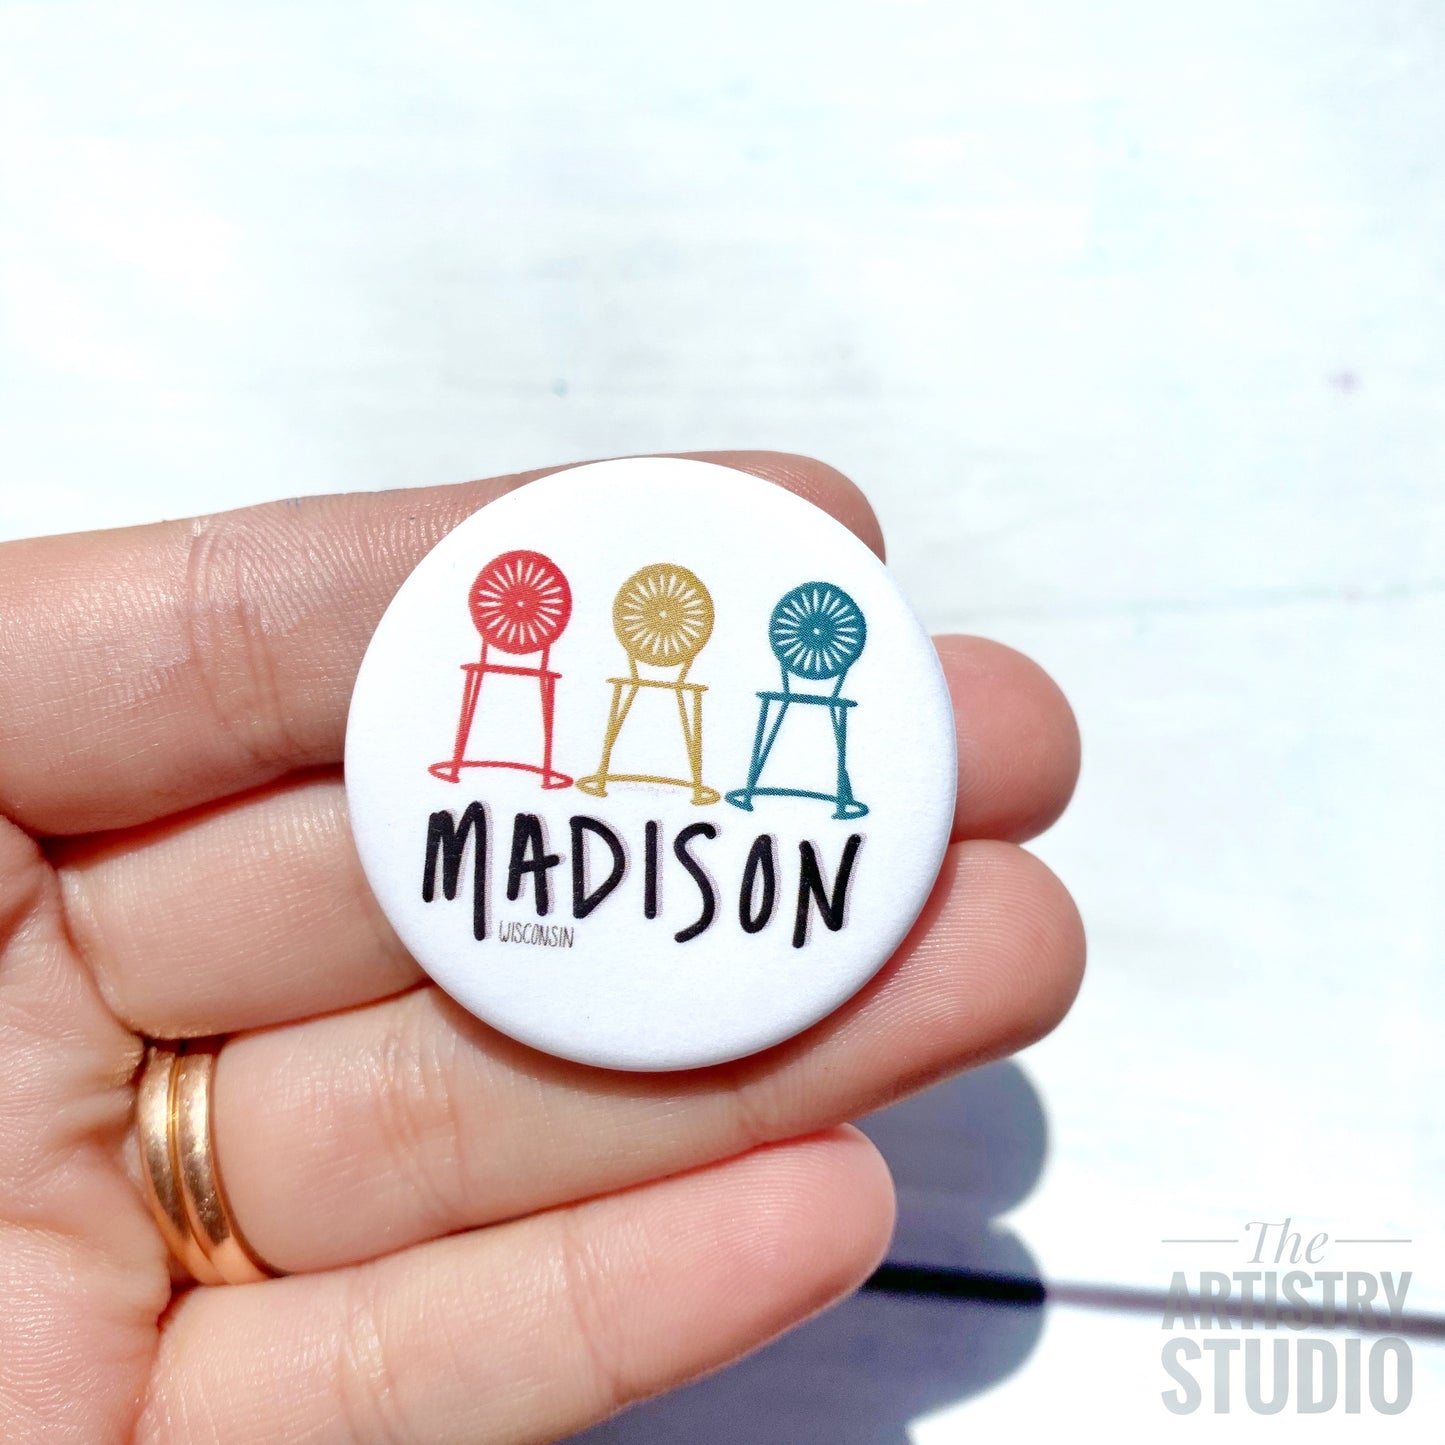 Madison Wisconsin Button | 1.5x1.5